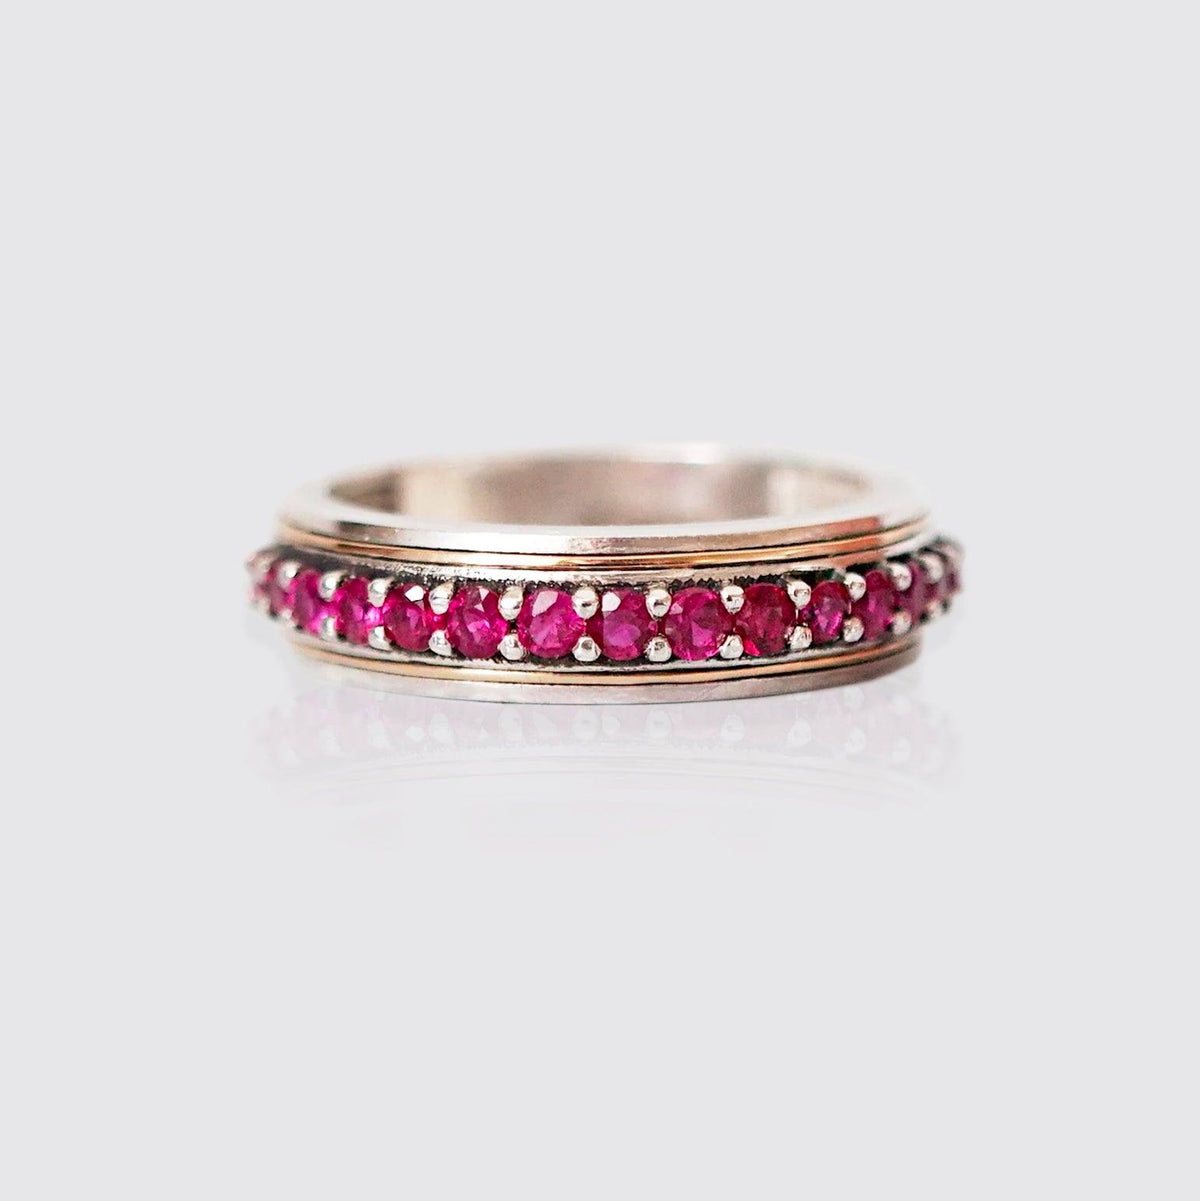 Silver/22K Gold Inlay Ruby Ring, 5mm